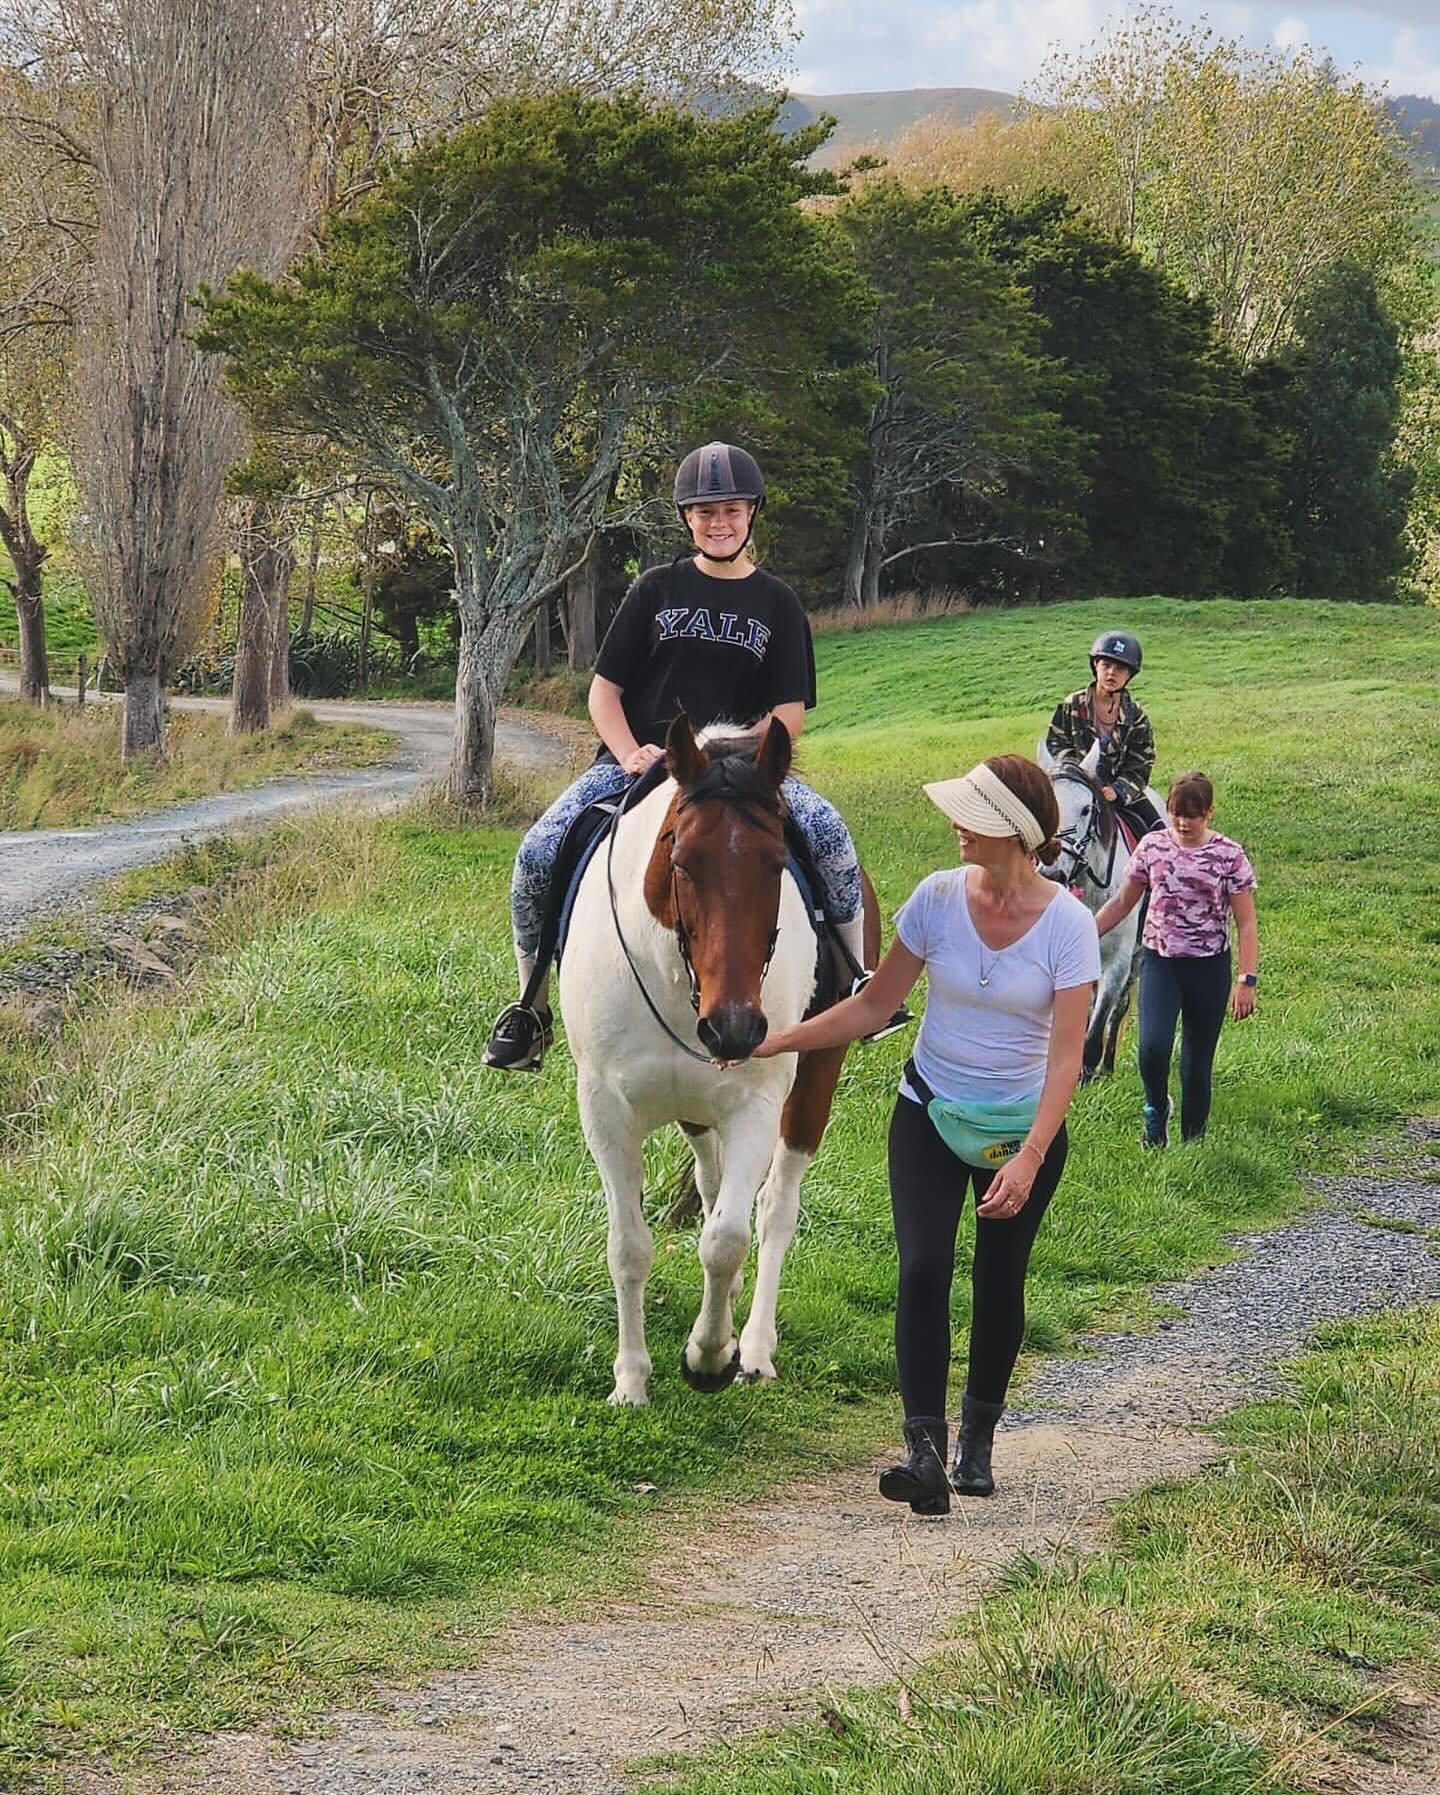 We have hoiho at Ariki! Some special moments on the whenua with Amys girls and Sara&rsquo;s majestic horses, who are grazing at the farm. 

Our mission is to create a beautiful and nurturing environment for humans and animals to thrive &hearts;️🐎

#